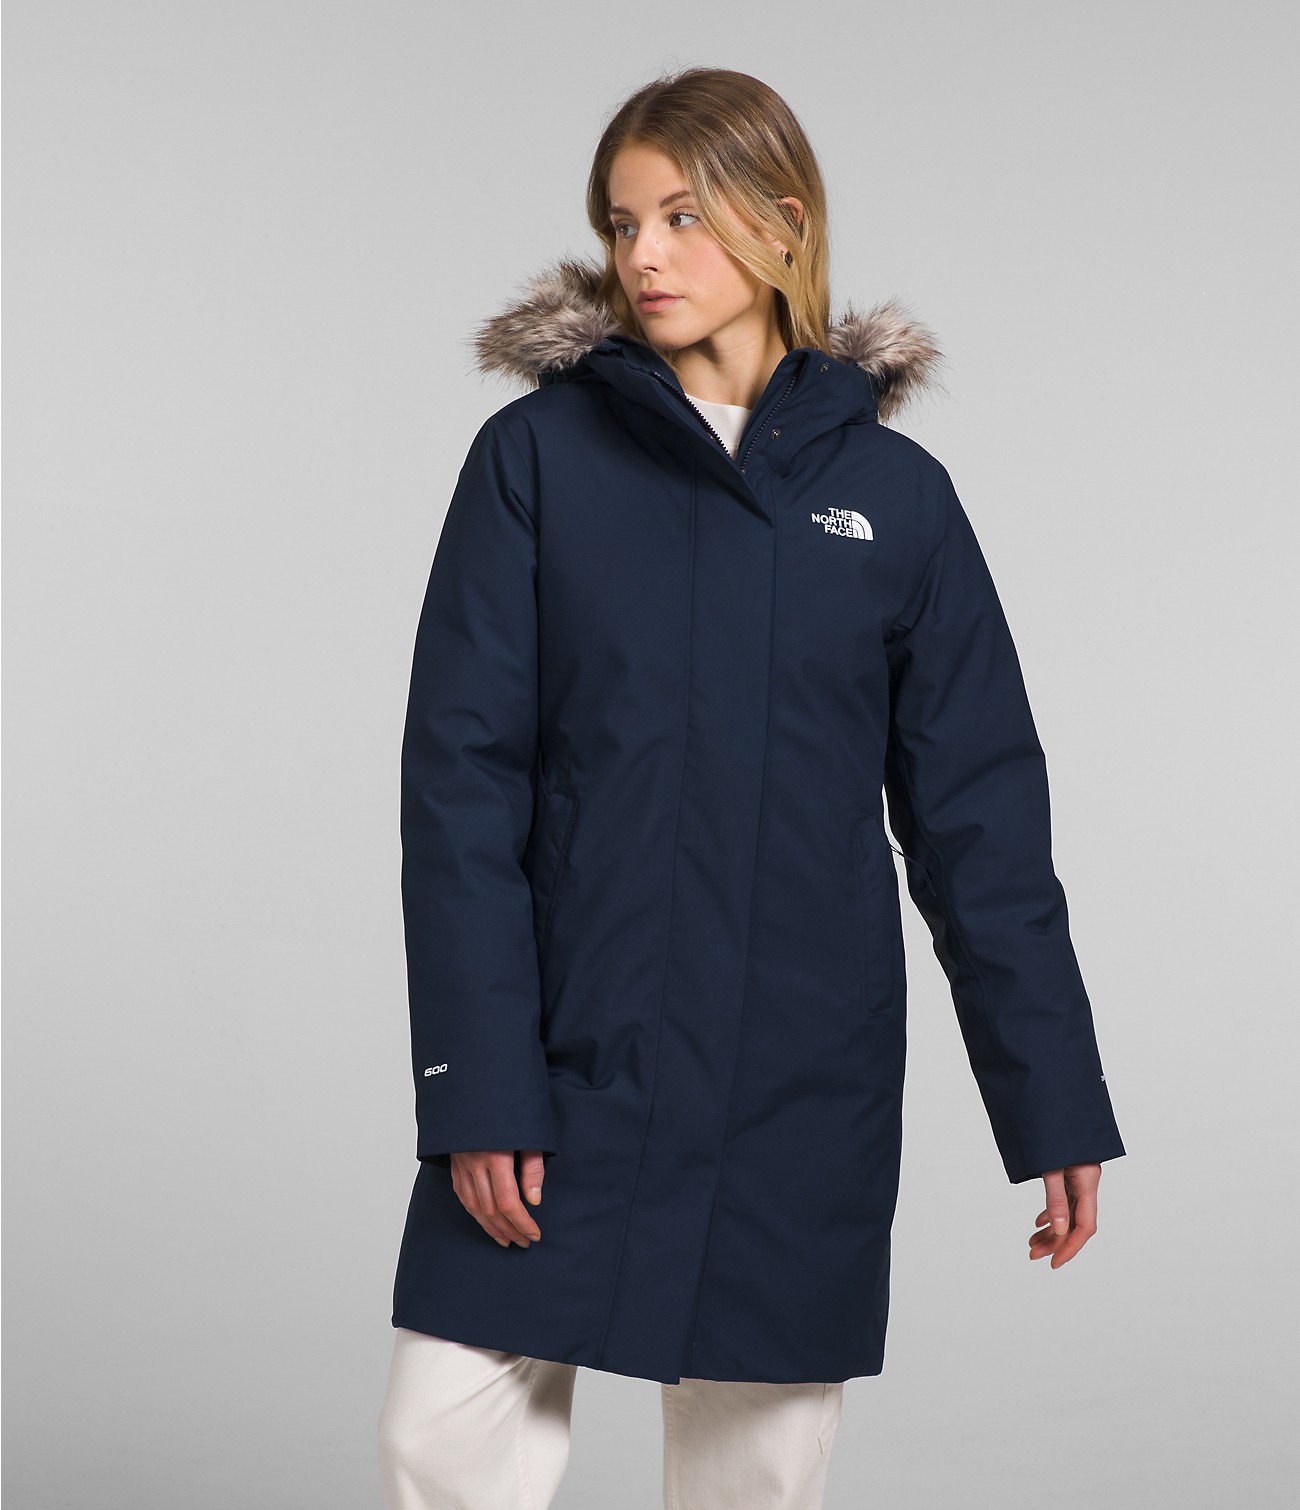 Unlock Wilderness' choice in the Point Zero Vs North Face comparison, the Arctic Parka by The North Face